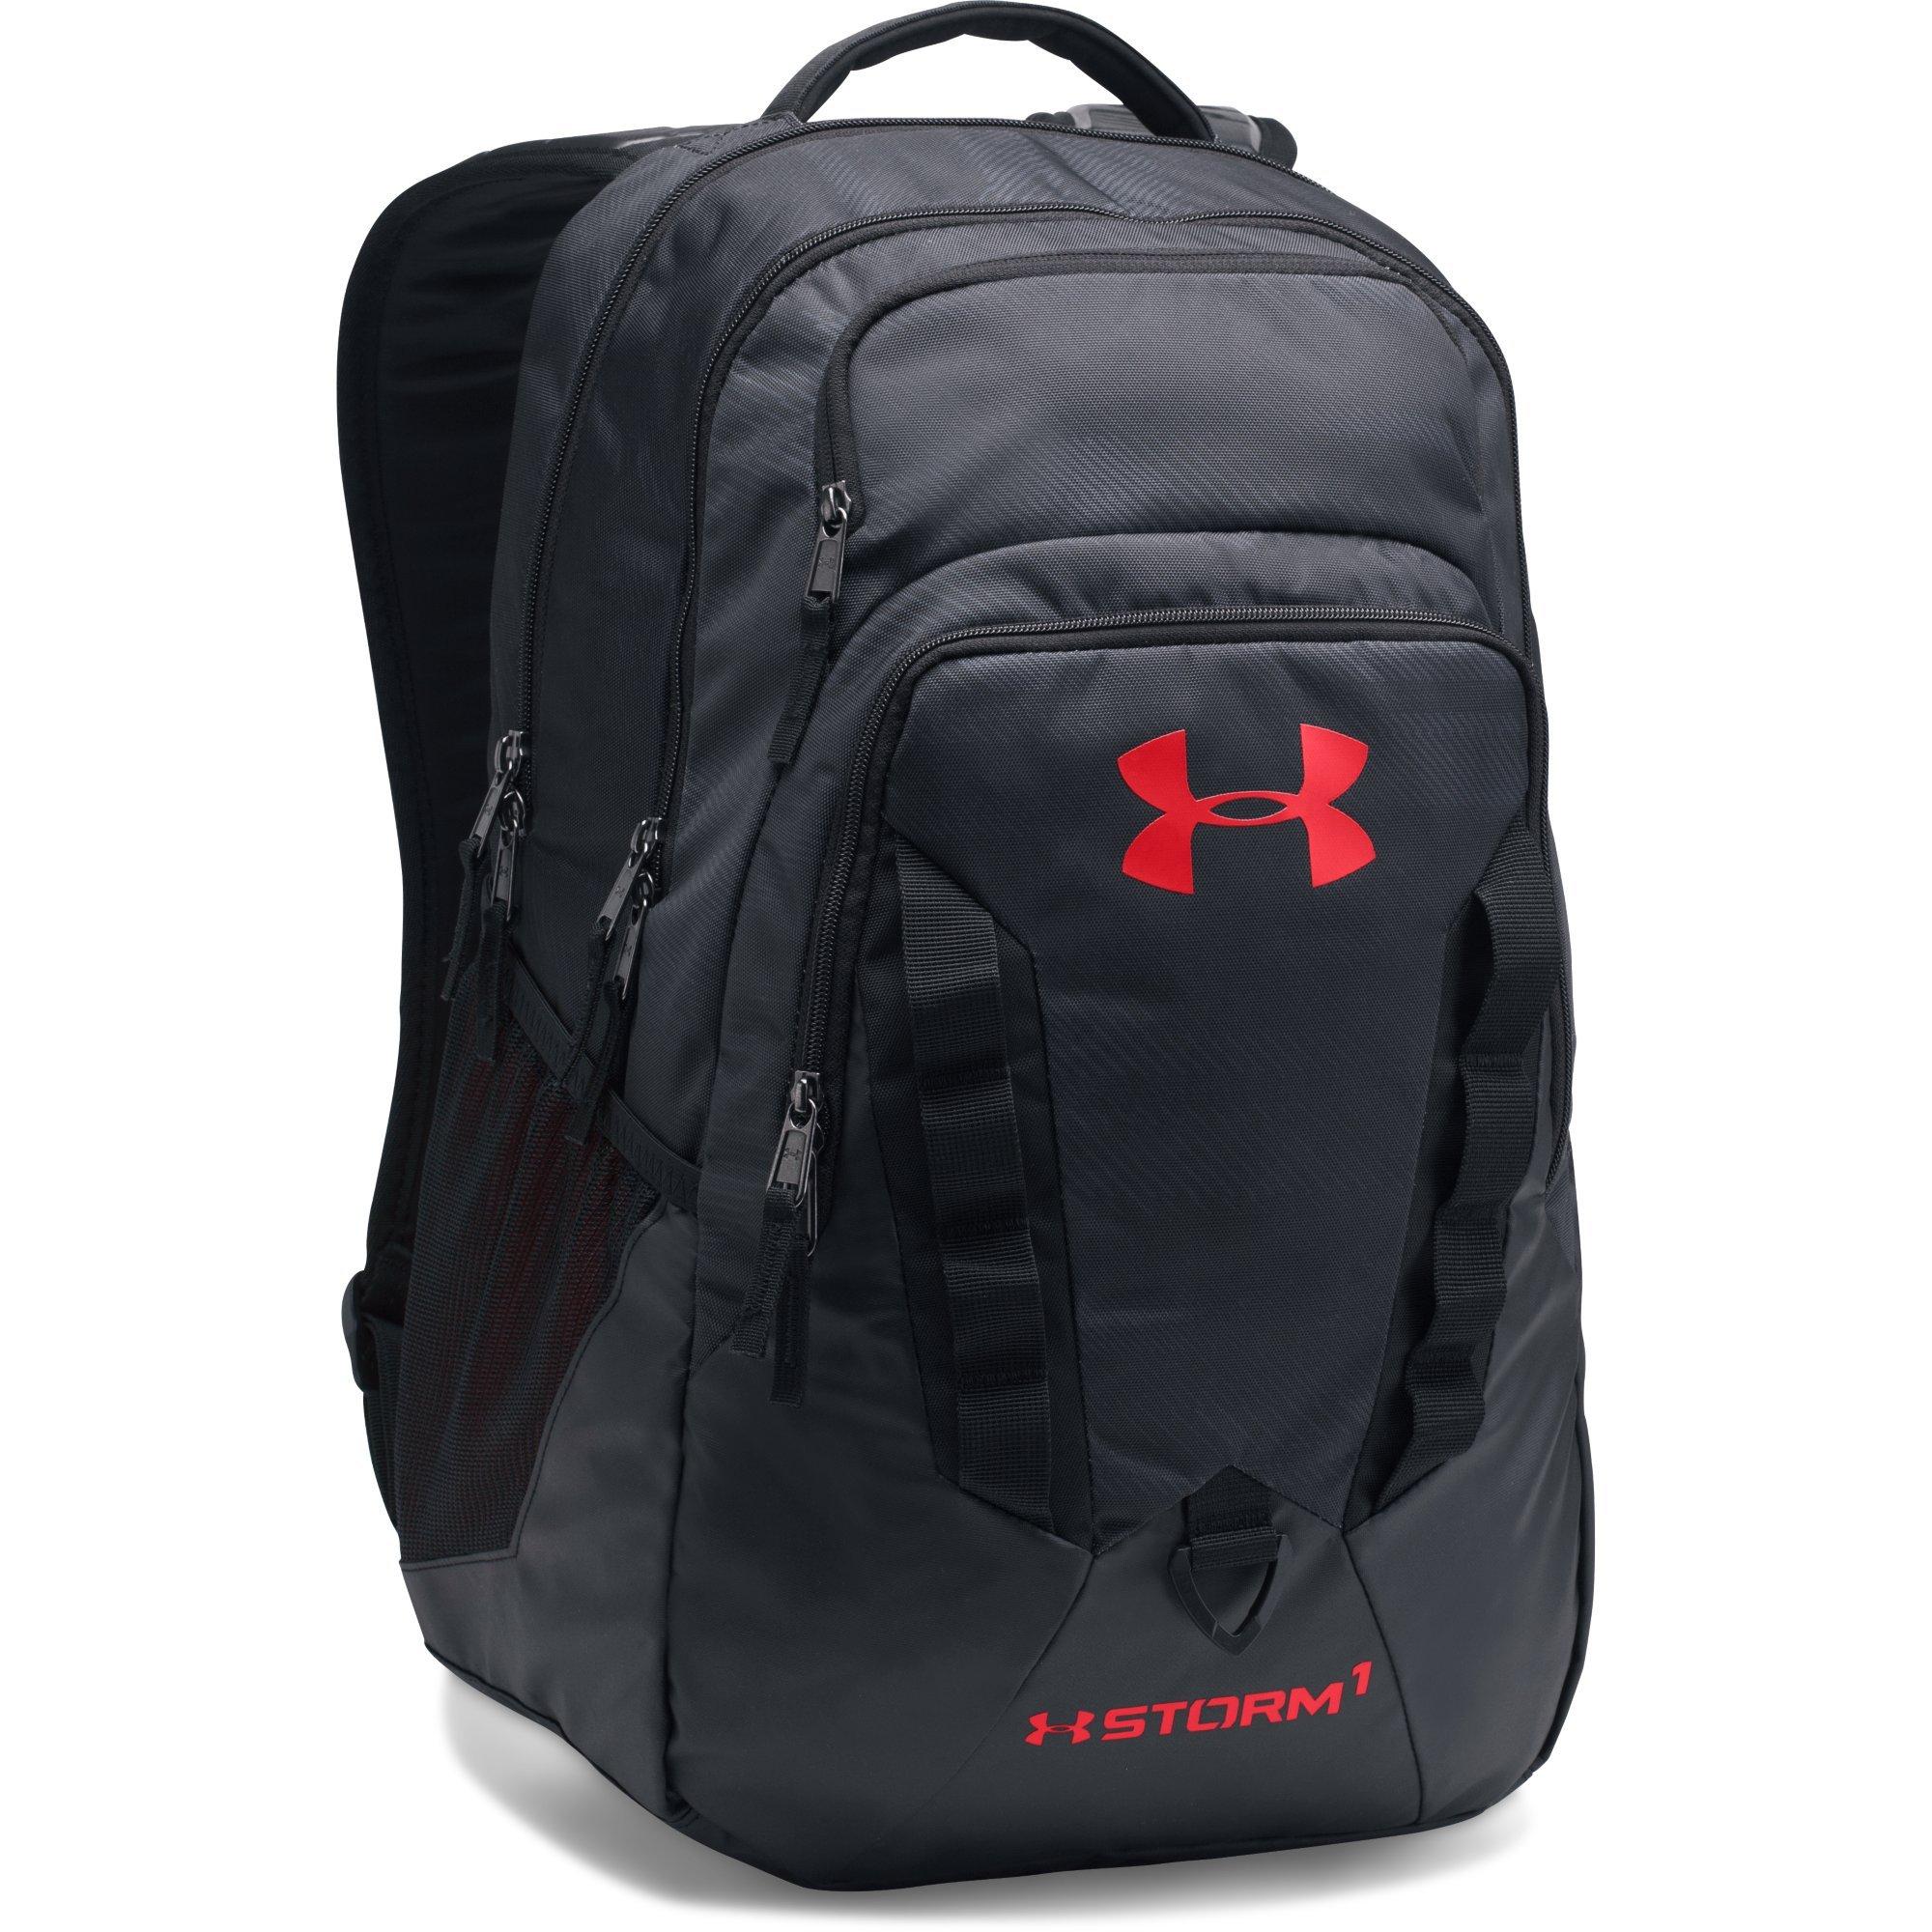 under armour storm backpack red